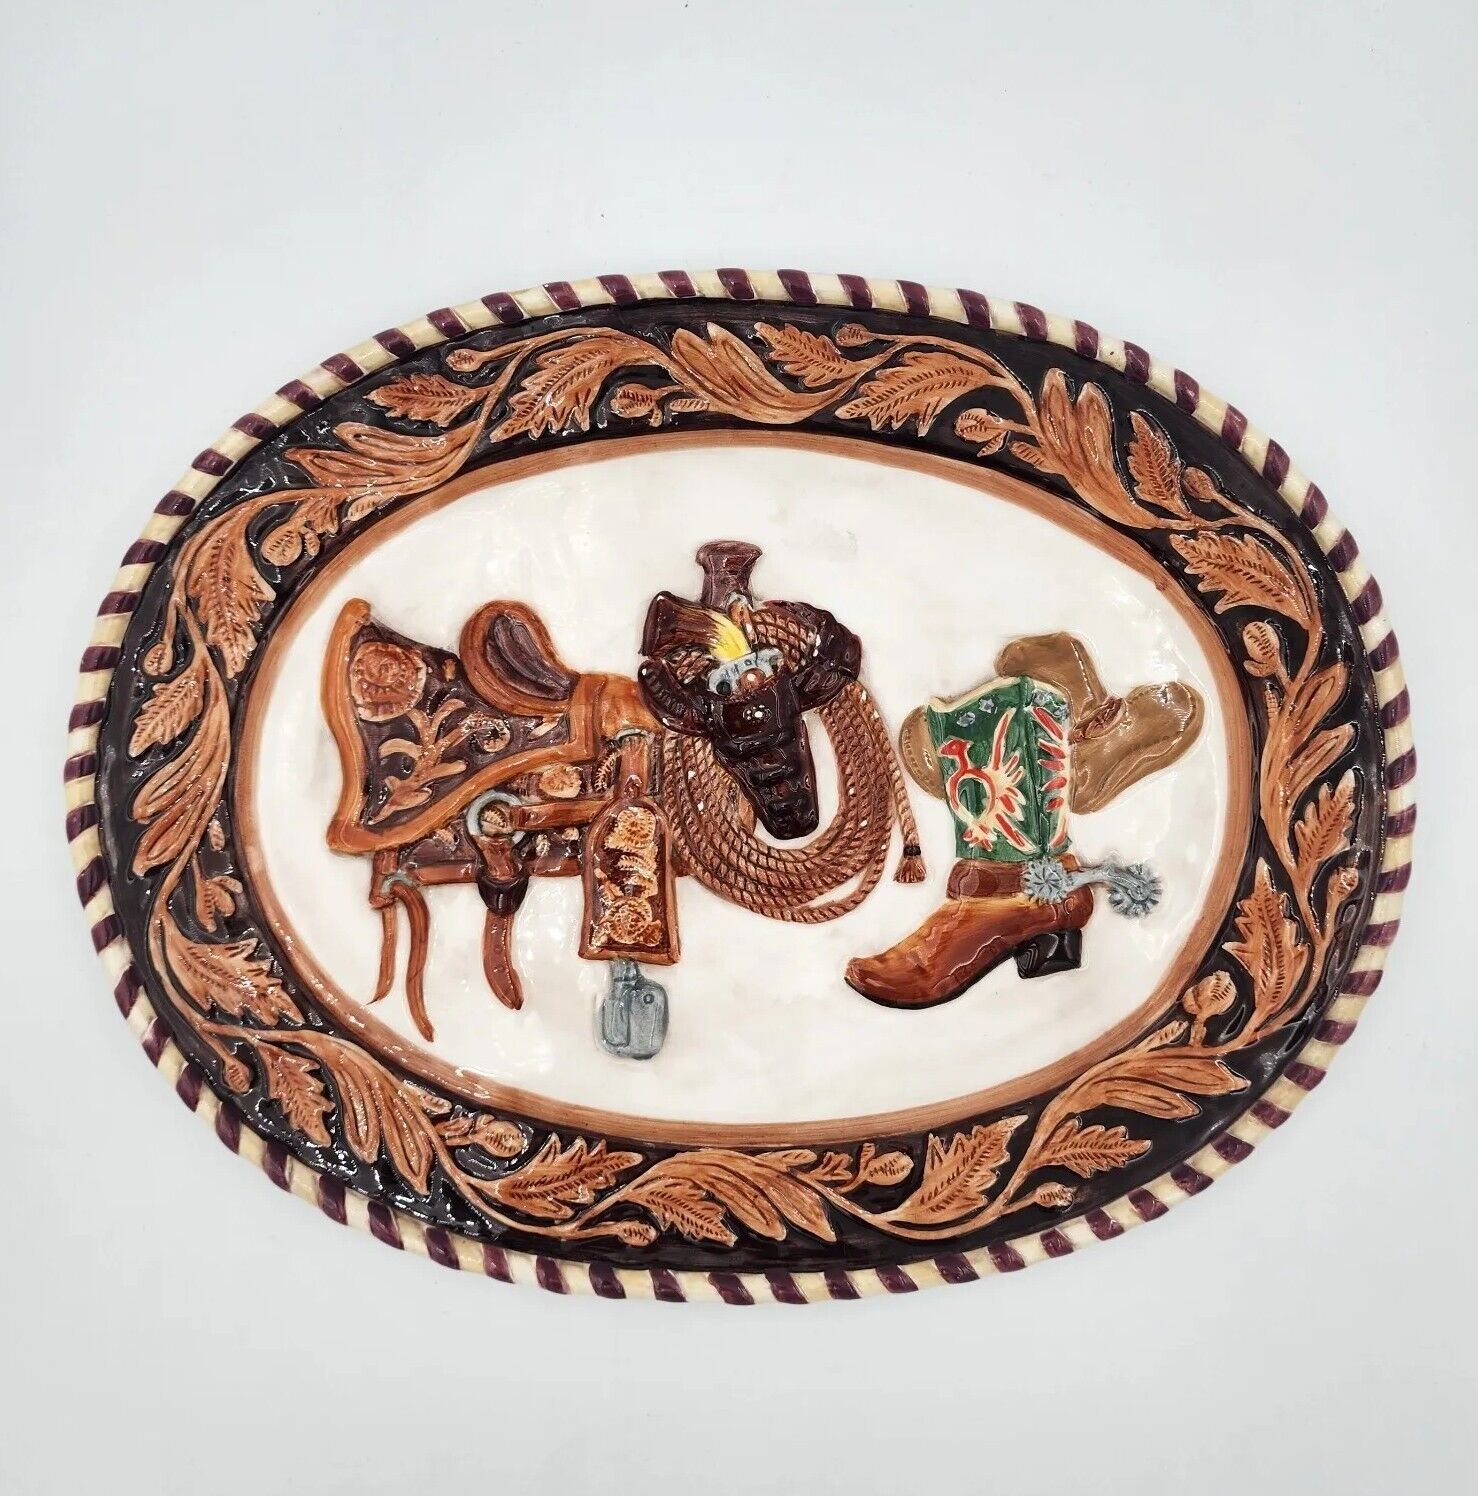 Vintage Collectible Ceramic Platter Western Rodeo Cowboy Design Oval SW 16”X13”